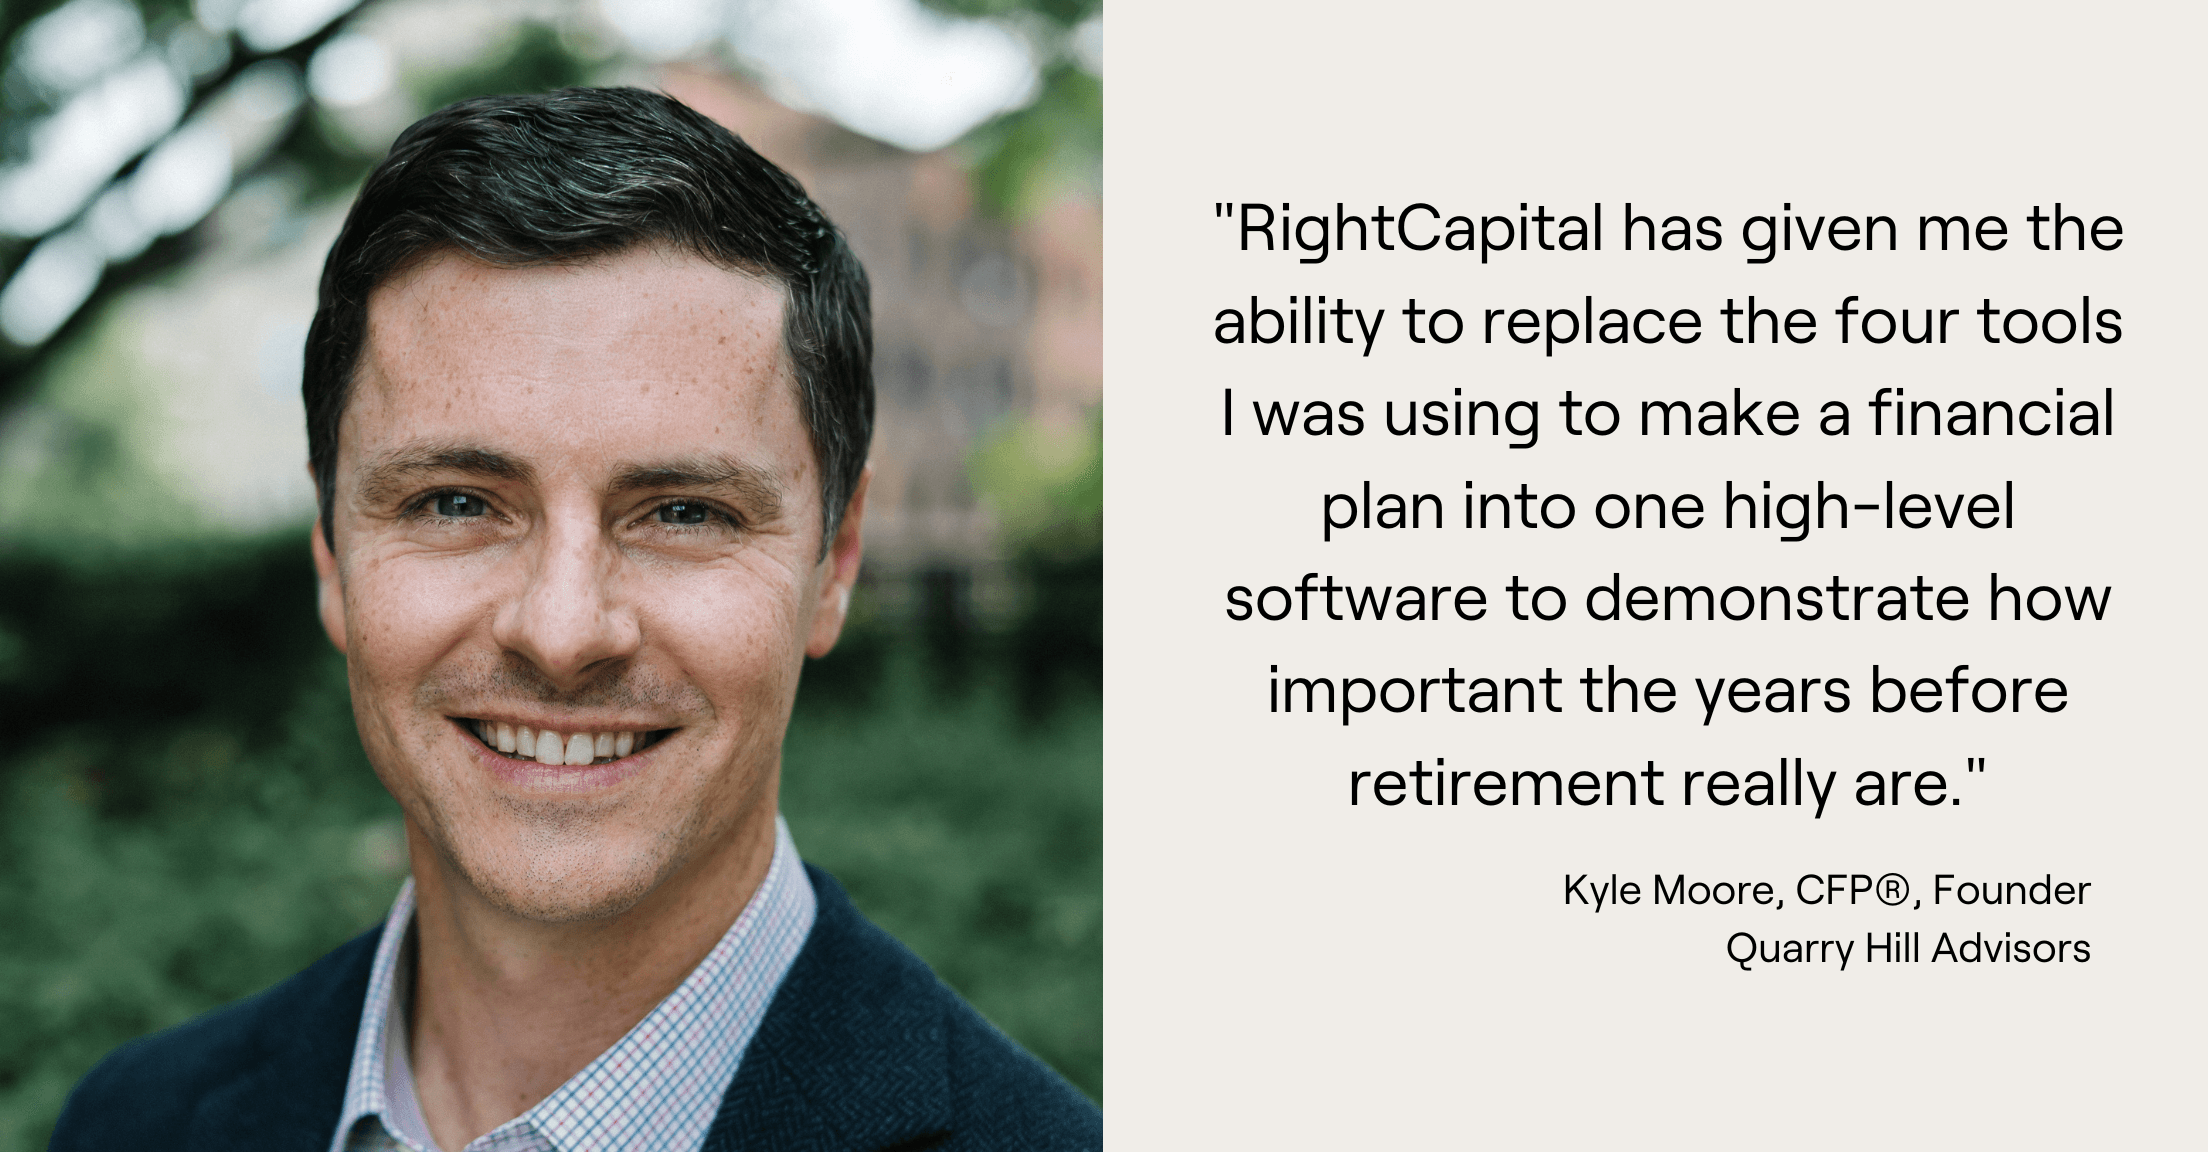 Quote from Kyle Moore, "RightCapital has given me the ability to replace the four tools I was using to make a financial plan into one high-level software to demonstrate how important the years before retirement really are."